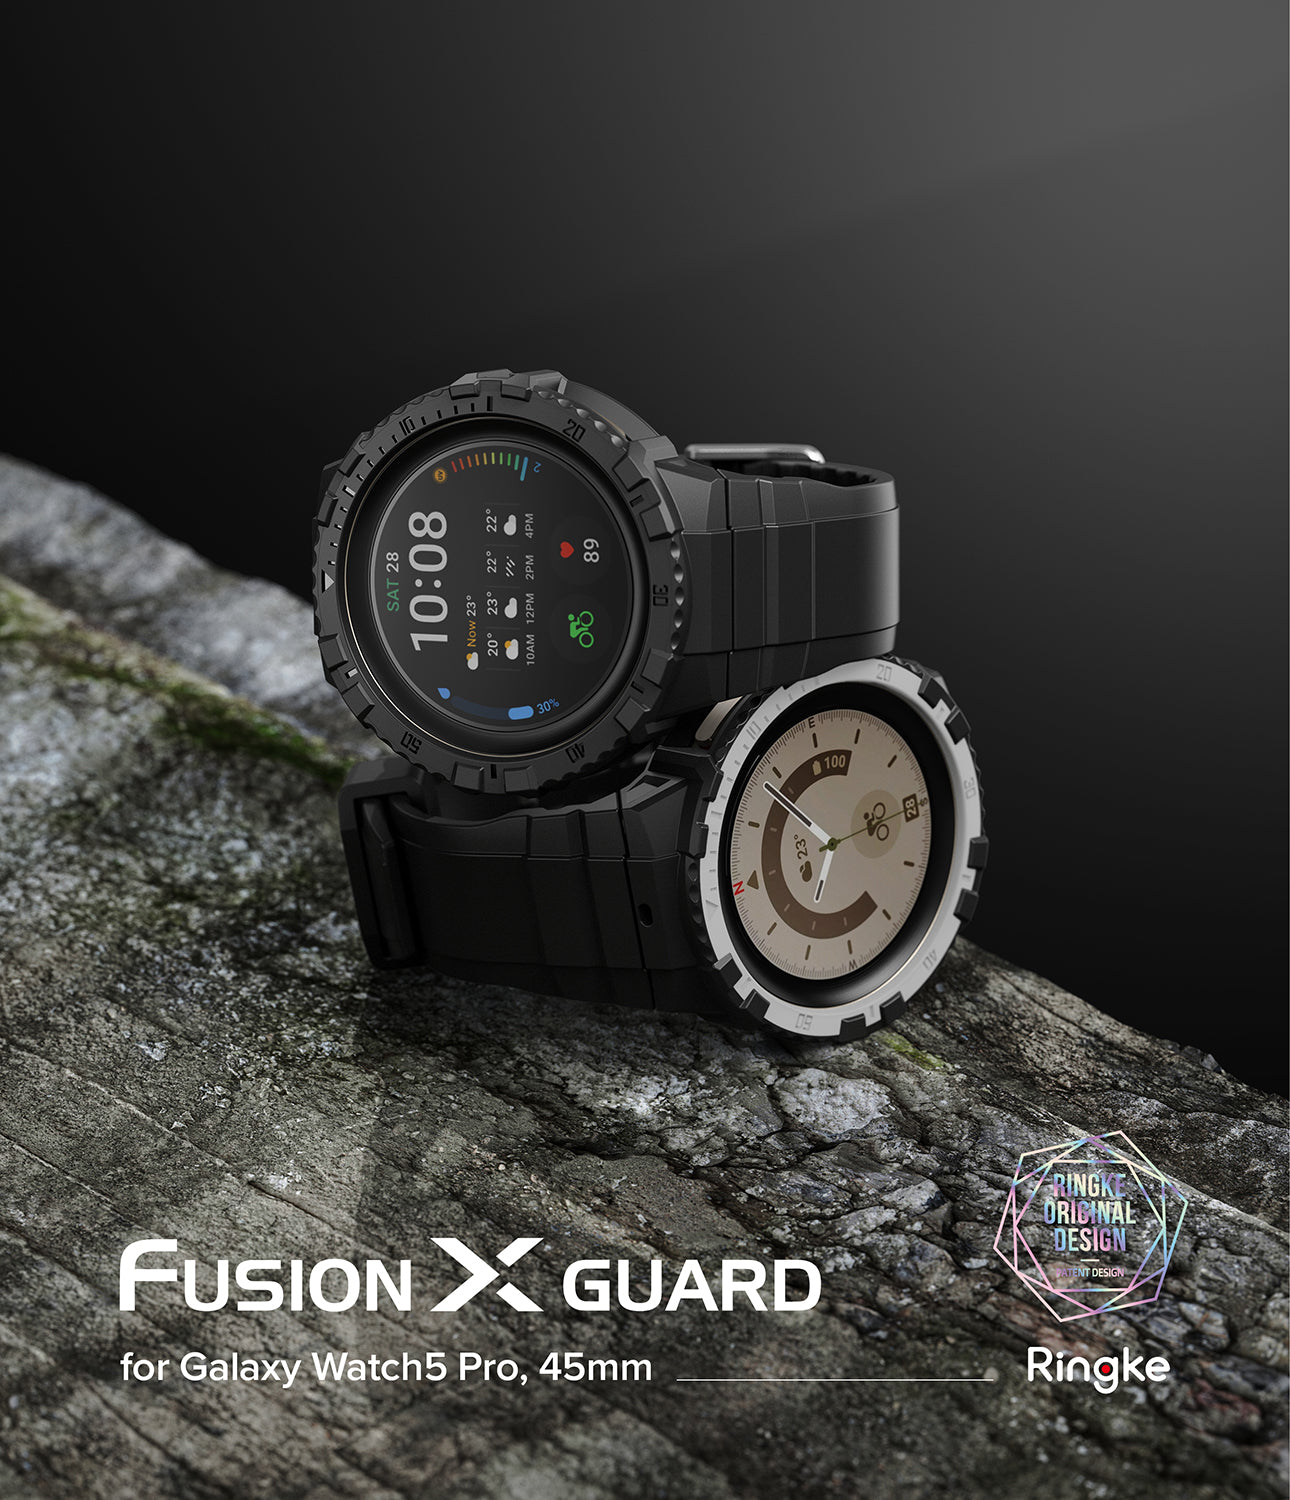 Samsung Galaxy Watch 5 Pro 45mm Case and Band | Fusion-X Guard